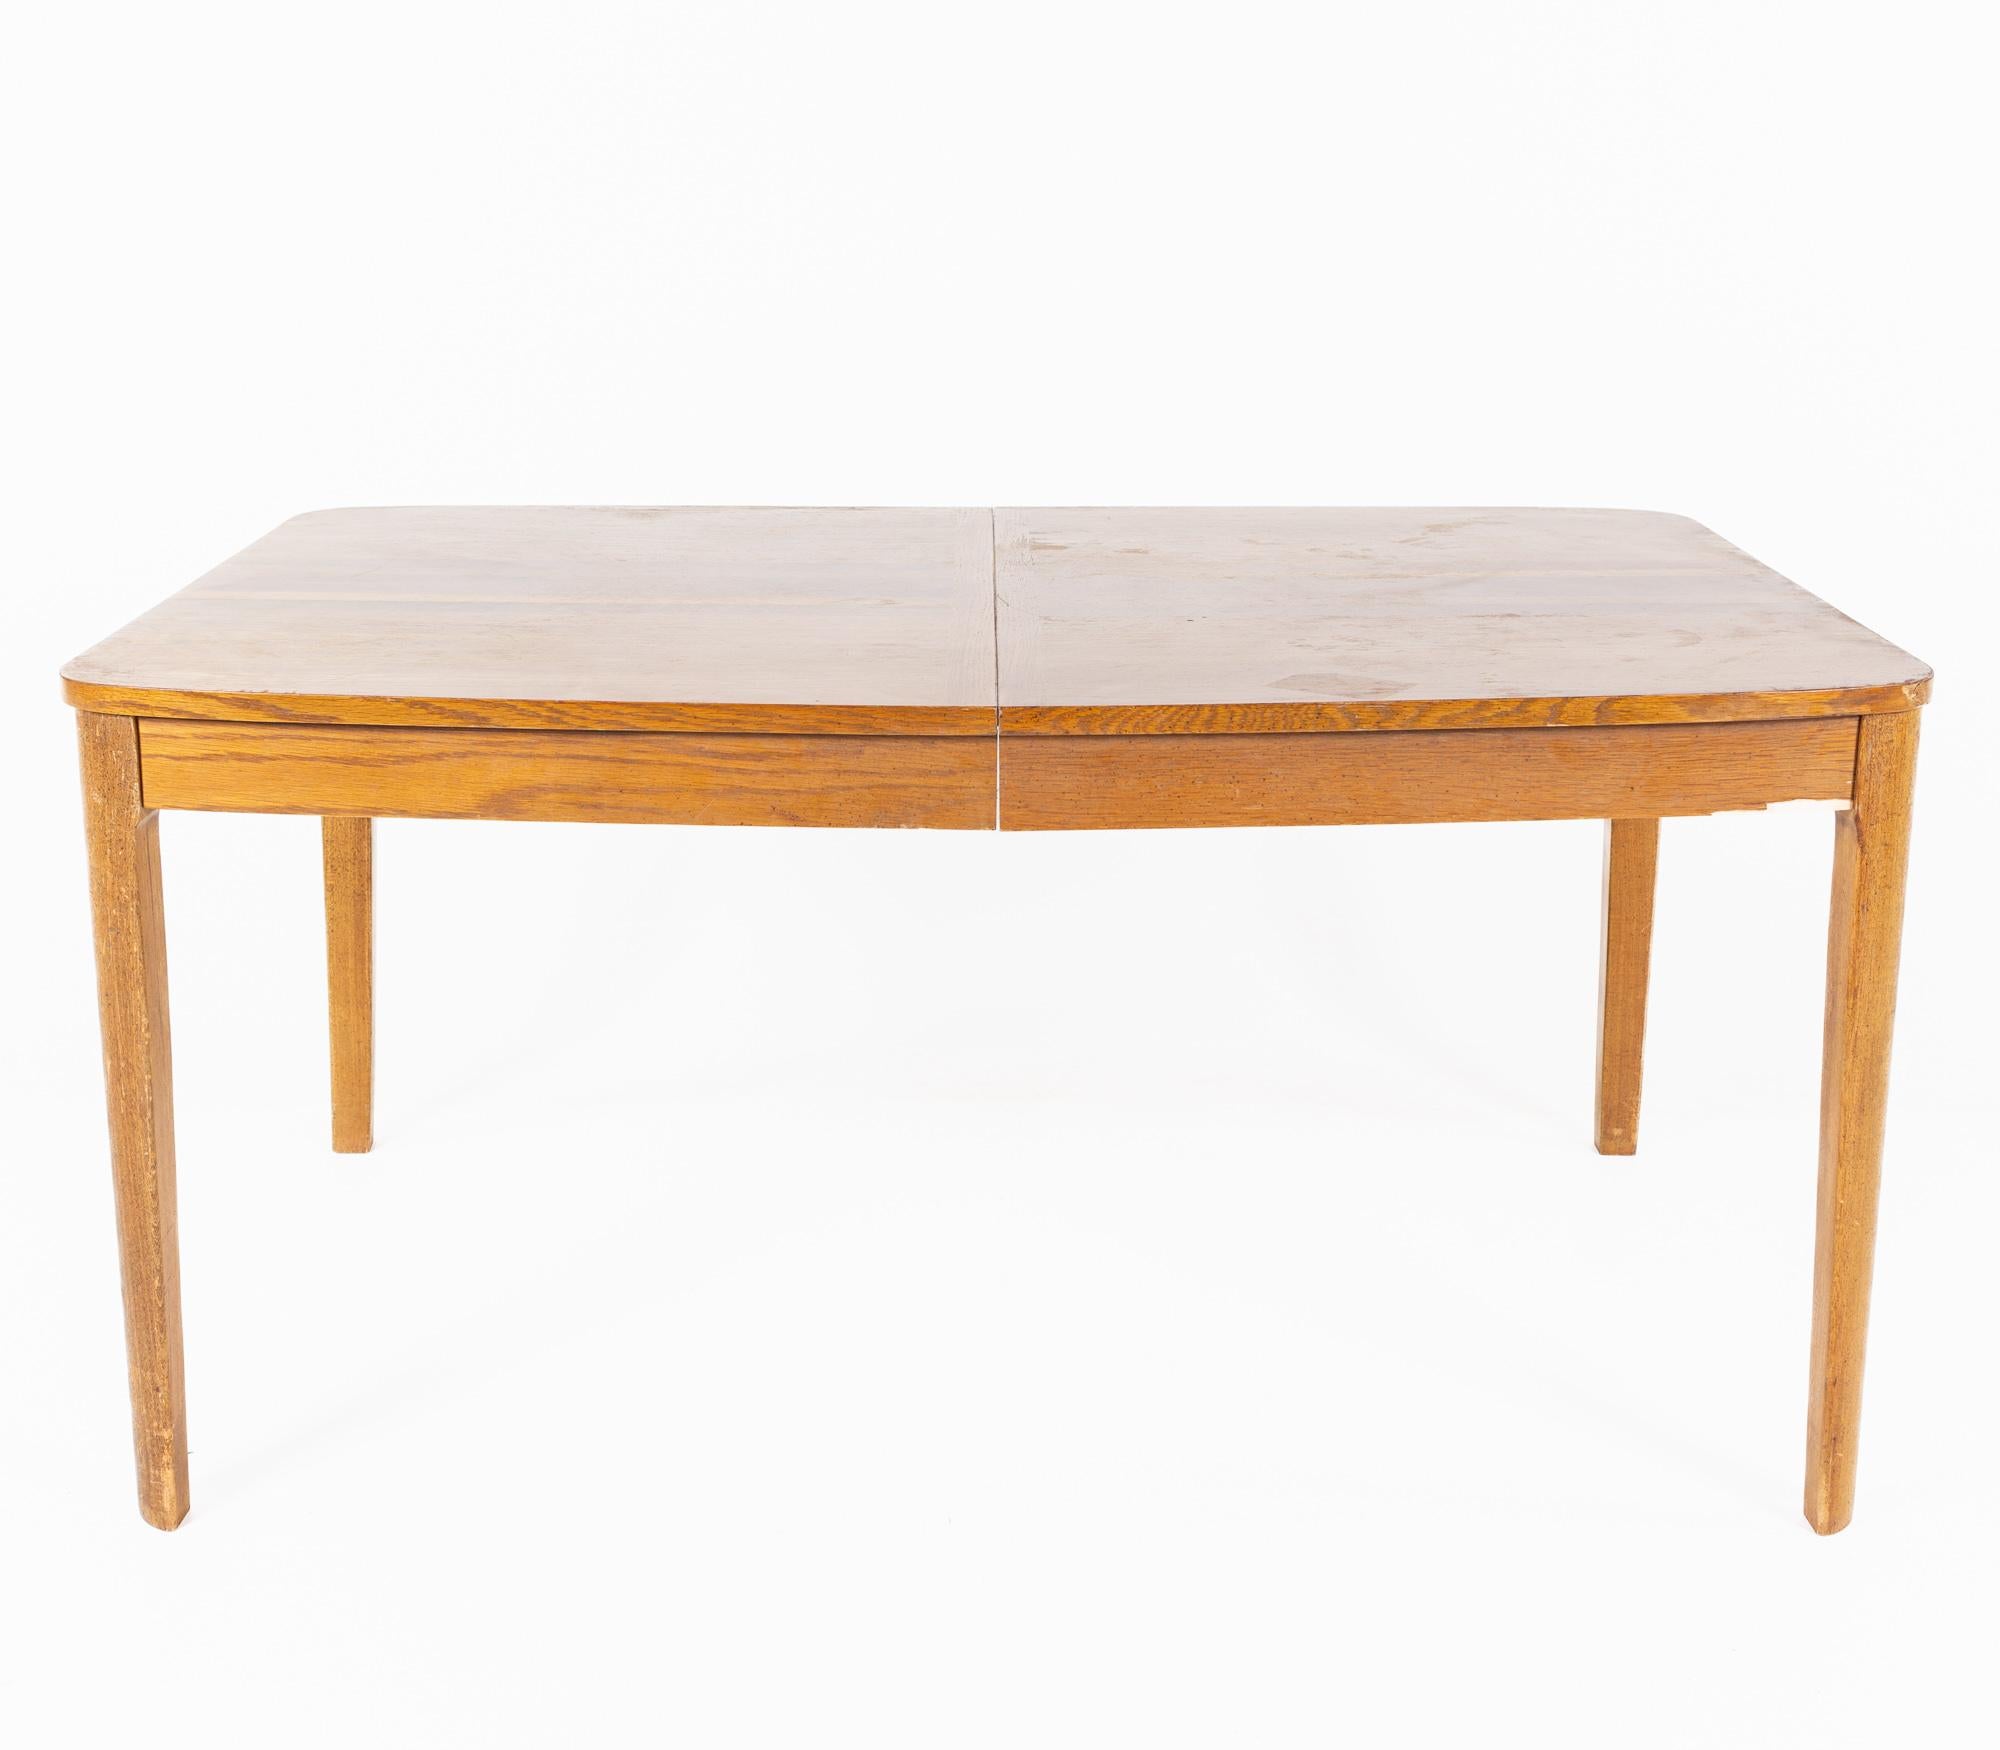 Mid century oak rosewood and walnut expanding dining table

This table measures: 60 wide x 40 deep x 29.5 inches high, with a chair clearance of 25.5 inches, the leaf measures 12 inches wide, making a maximum table width of 72 inches

All pieces